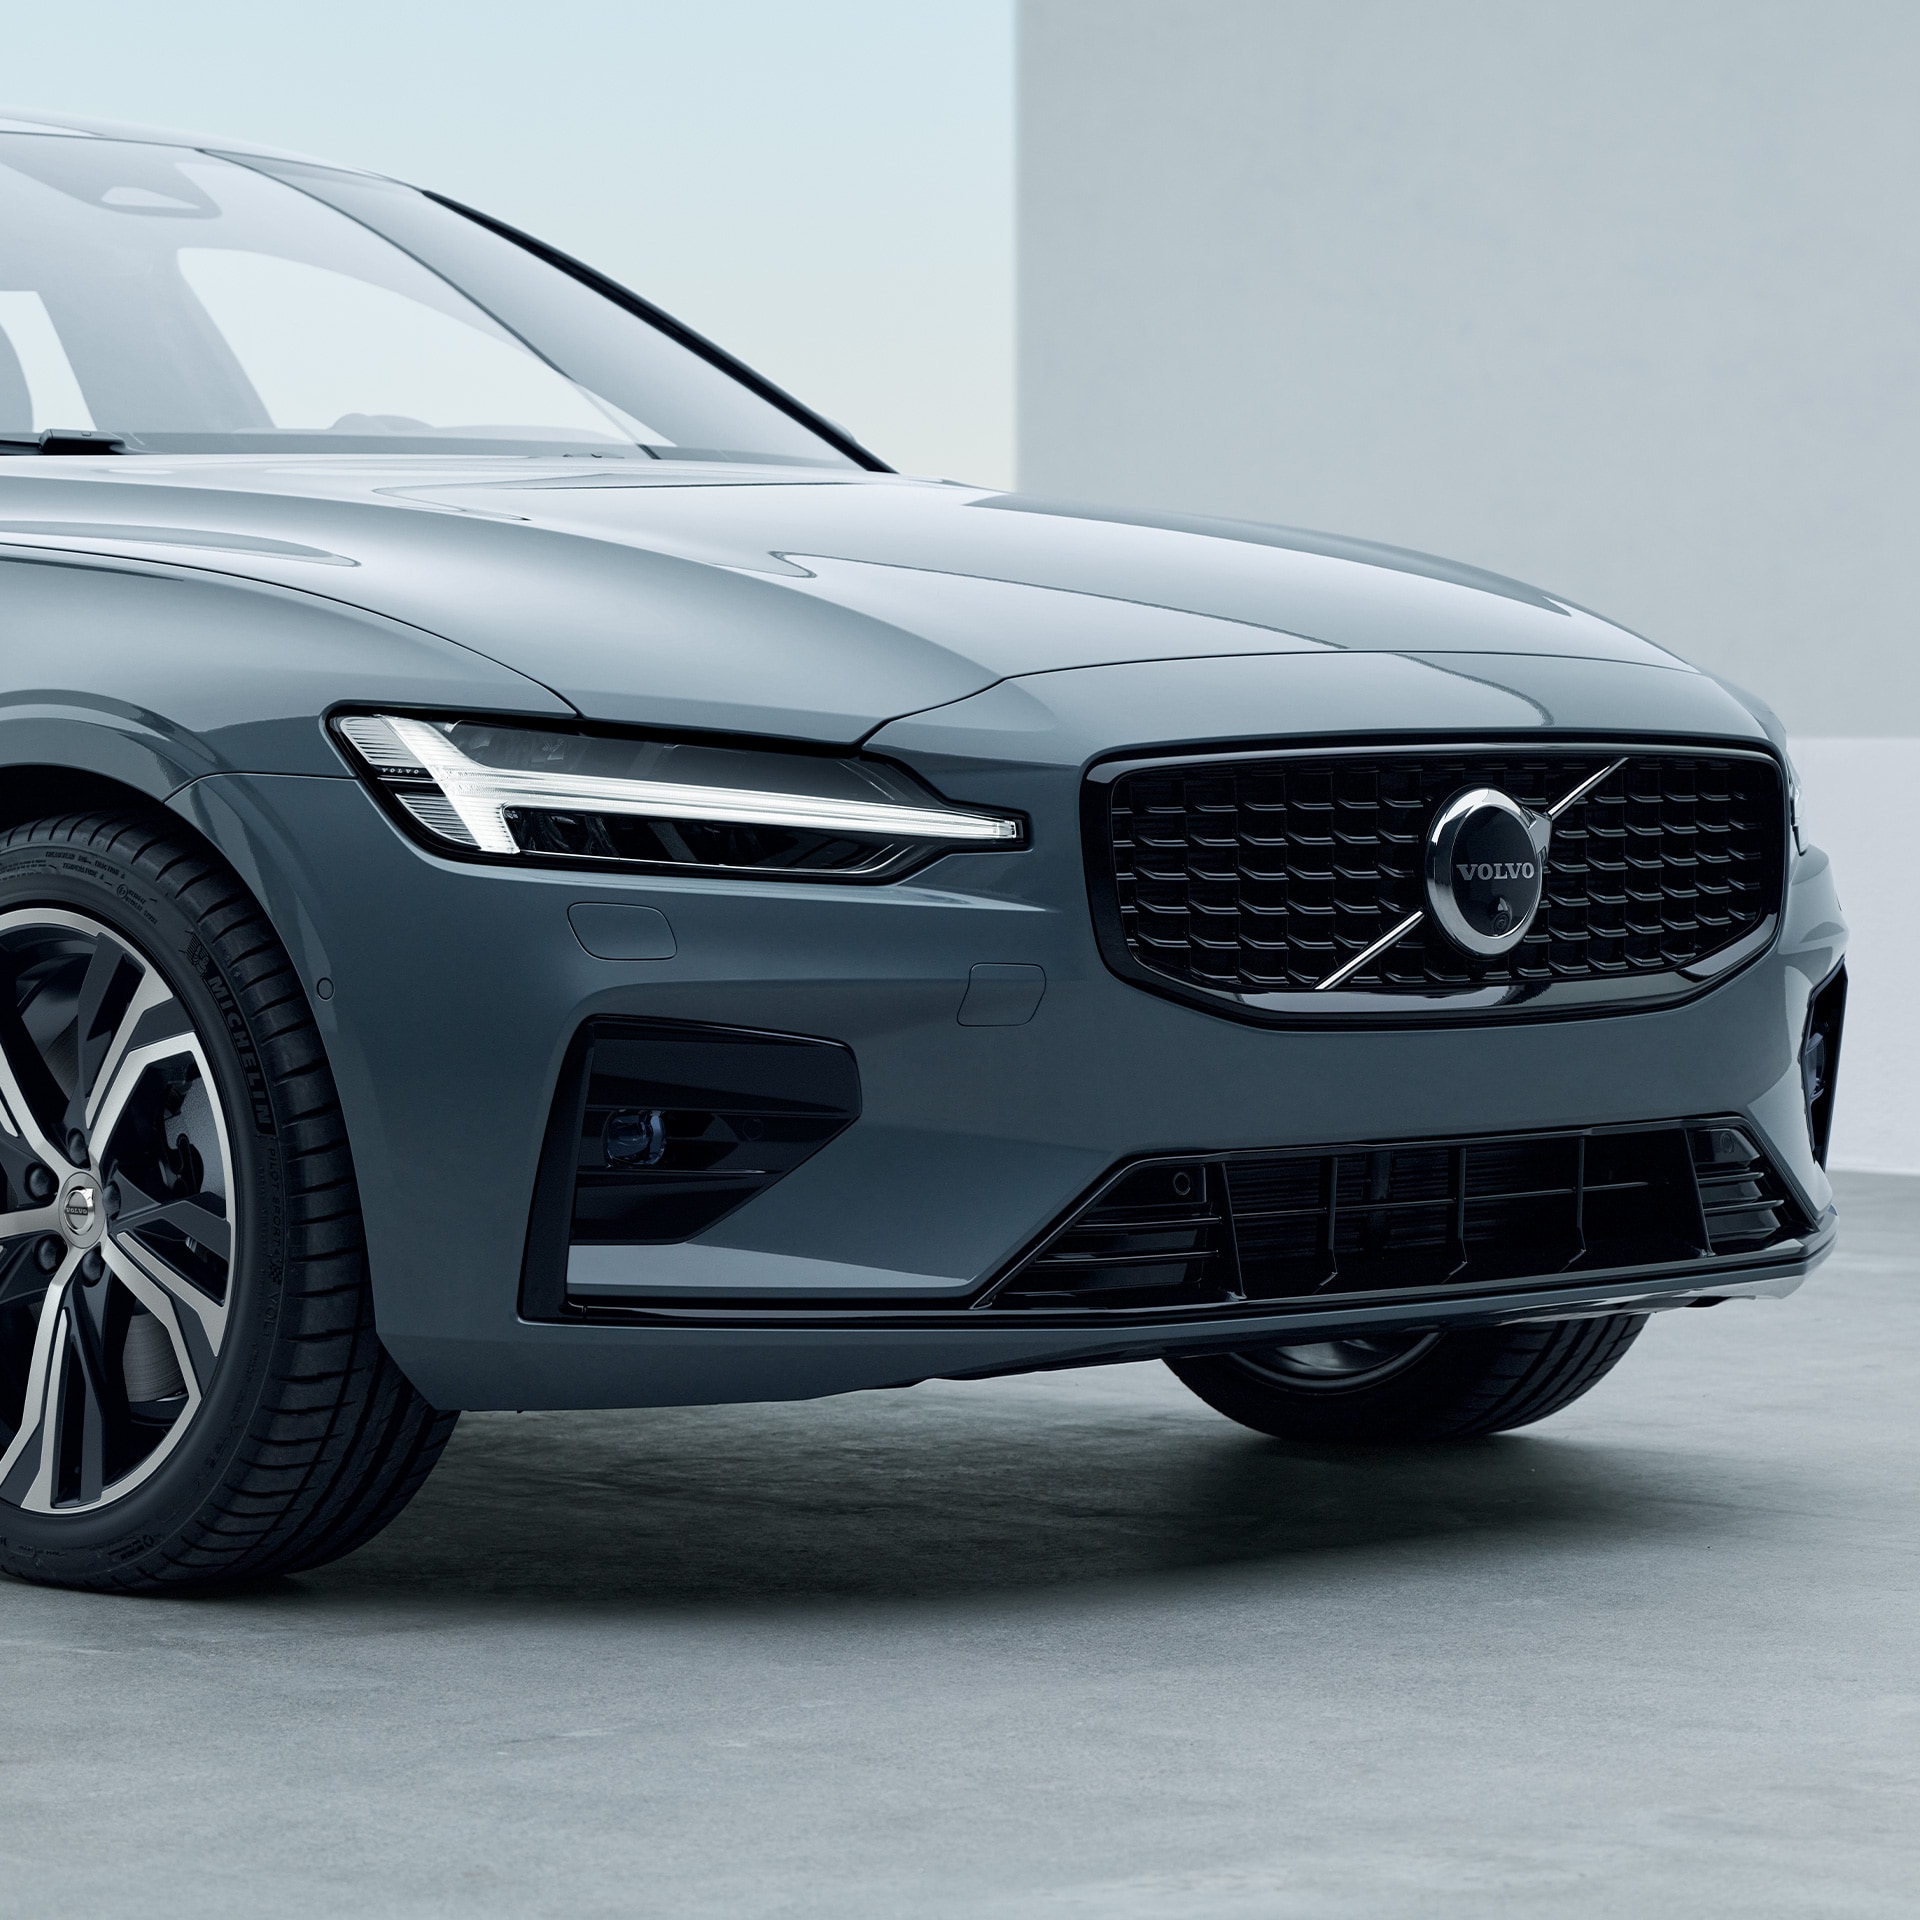 Volvo S60 sedan with an advanced chassis.